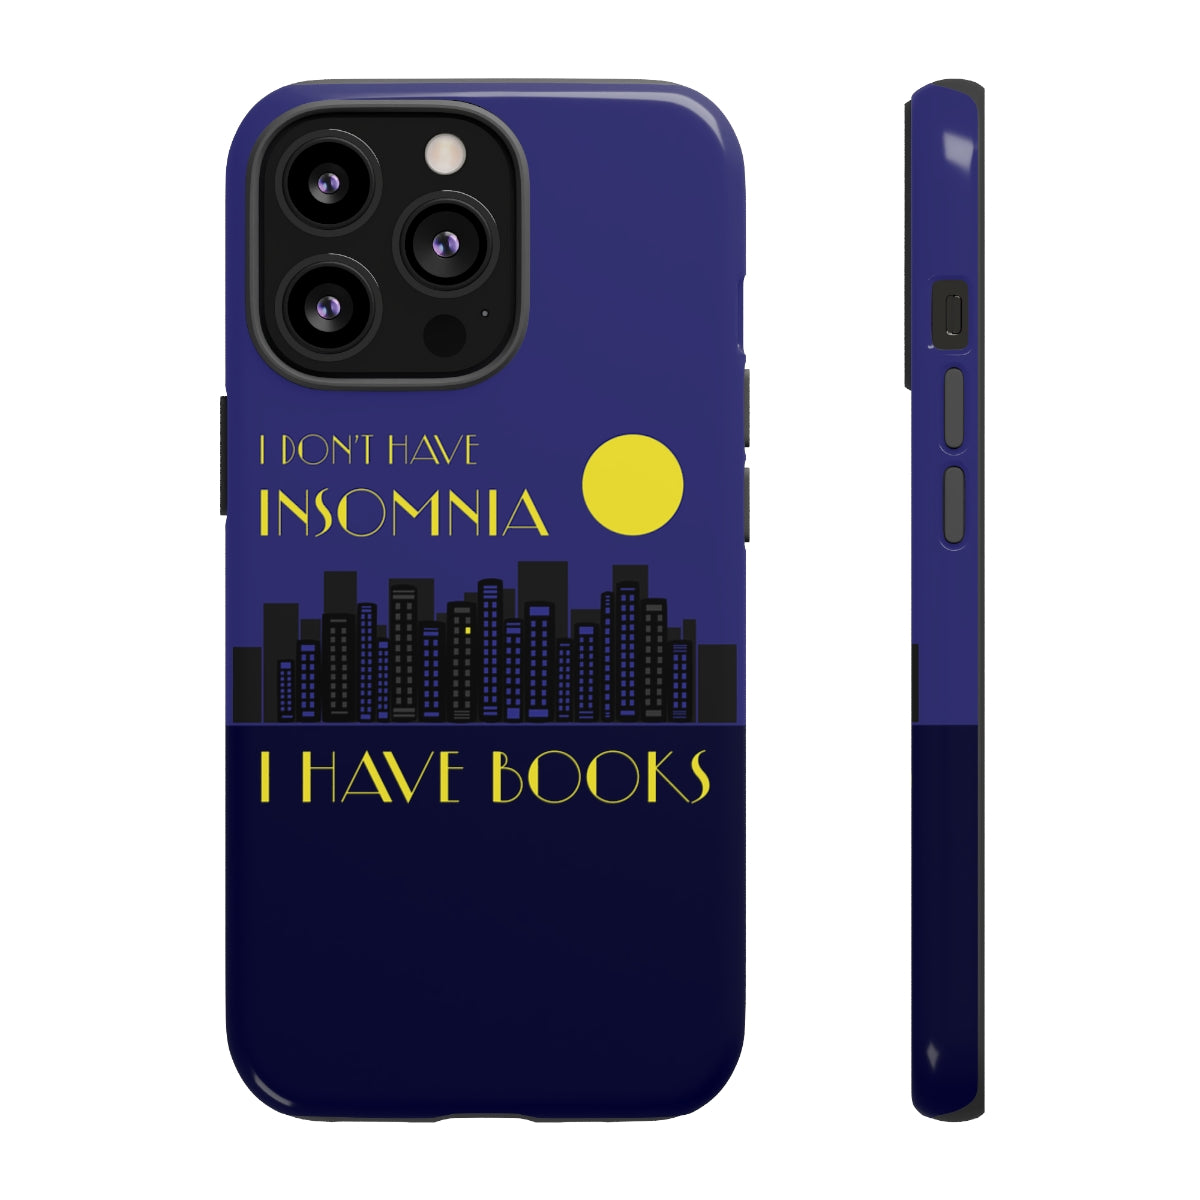 I DON'T HAVE INSOMNIA Phone Case - Literary Lifestyle Company